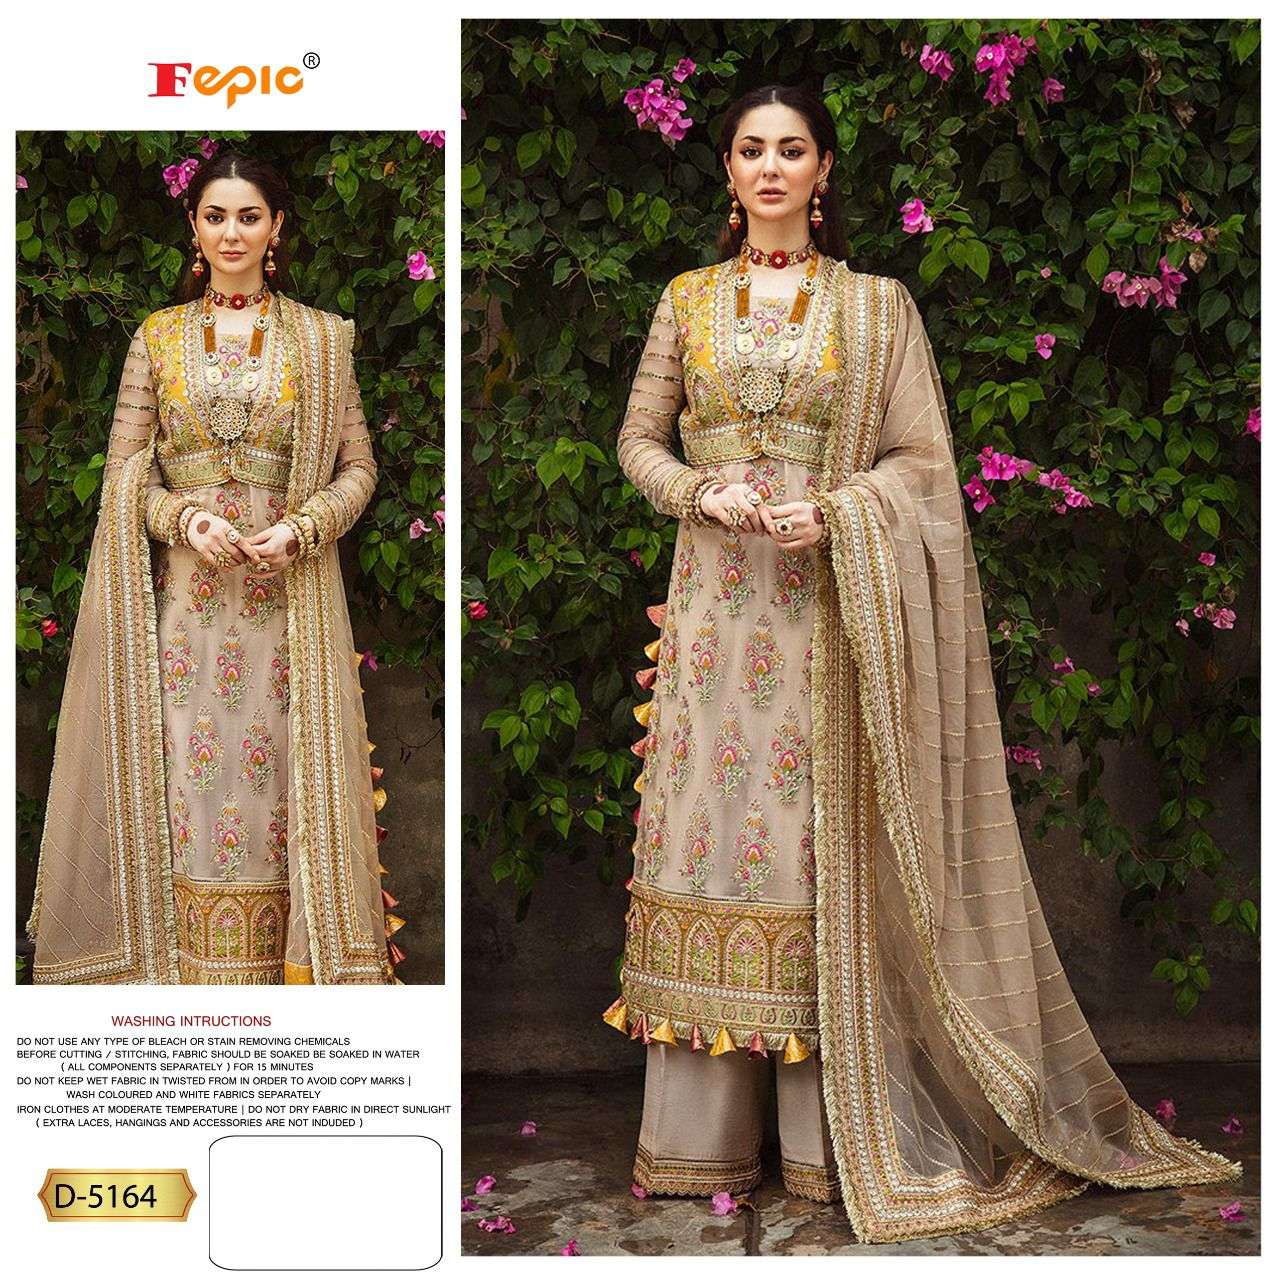 FEPIC ROSEMEEN D 5164 NET CATCHY LOOK SALWAR SUIT AND PARTY WEAR SALWER SUITSINGLEE